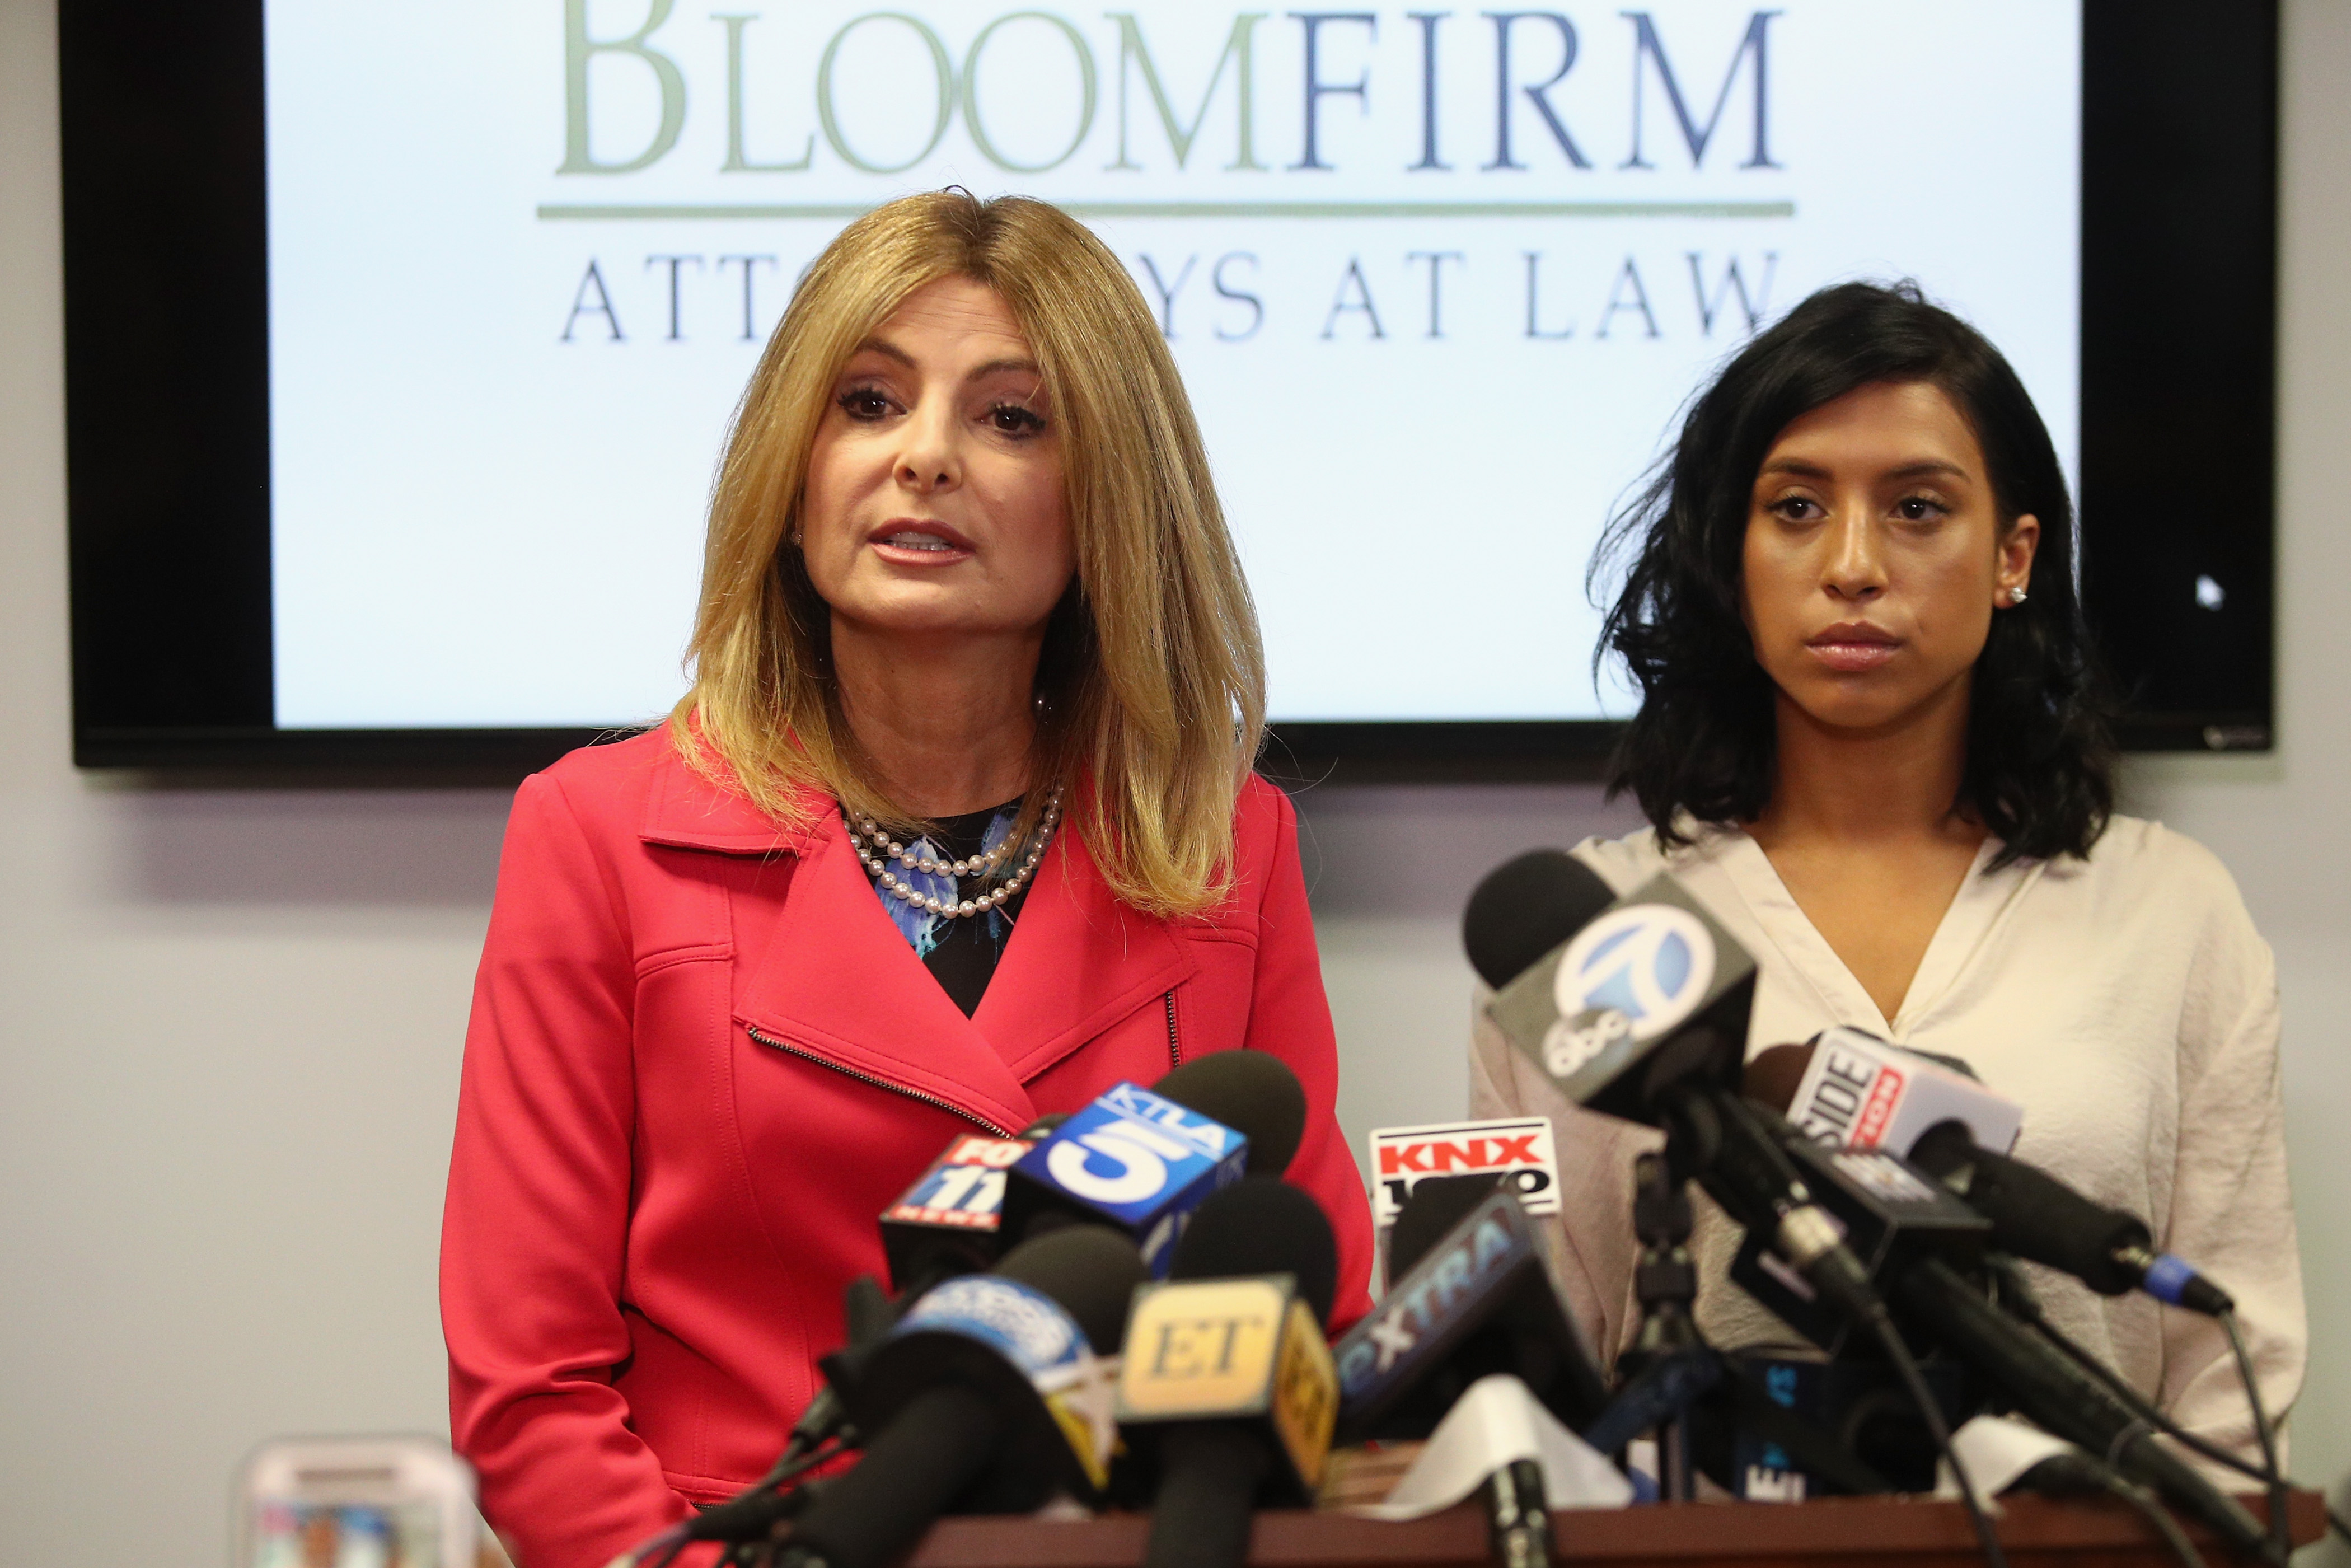 Lisa Bloom (L), lawyer for Montia Sabbag, speaks regarding the alleged attack on her client's character after accusations that Sabbag attempted to extort comedian Kevin Hart during a press conference held at The Bloom Firm September 20, 2017 in Woodland Hills, California.  The scandal stems from a provocative video taken in Las Vegas last month where both Hart and Sabbag are seen. (Frederick M. Brown&mdash;Getty Images)